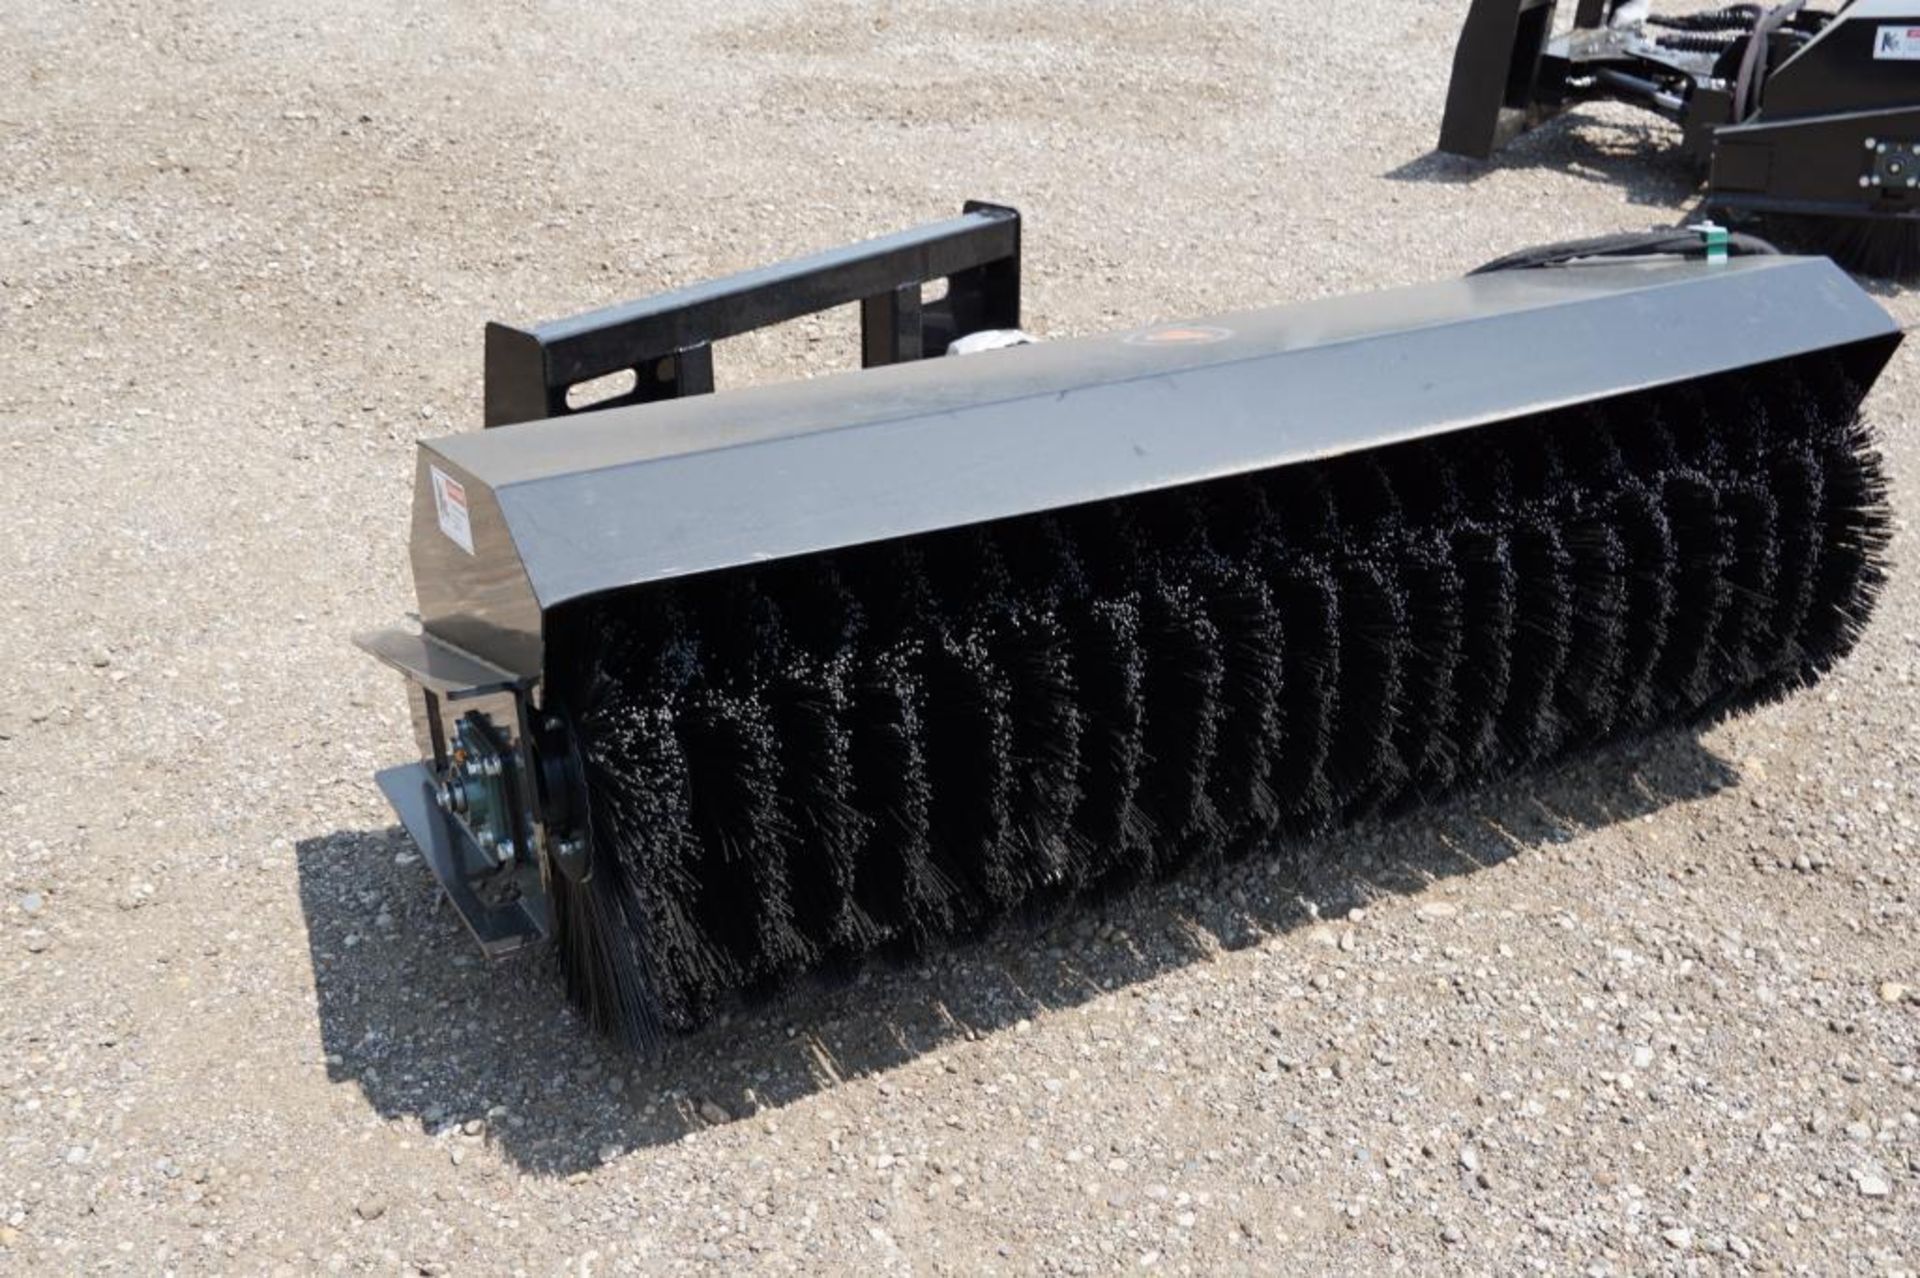 New! 2023 Wolverine Skid Steer Angle Broom Industrial Series Attachment - Image 2 of 5